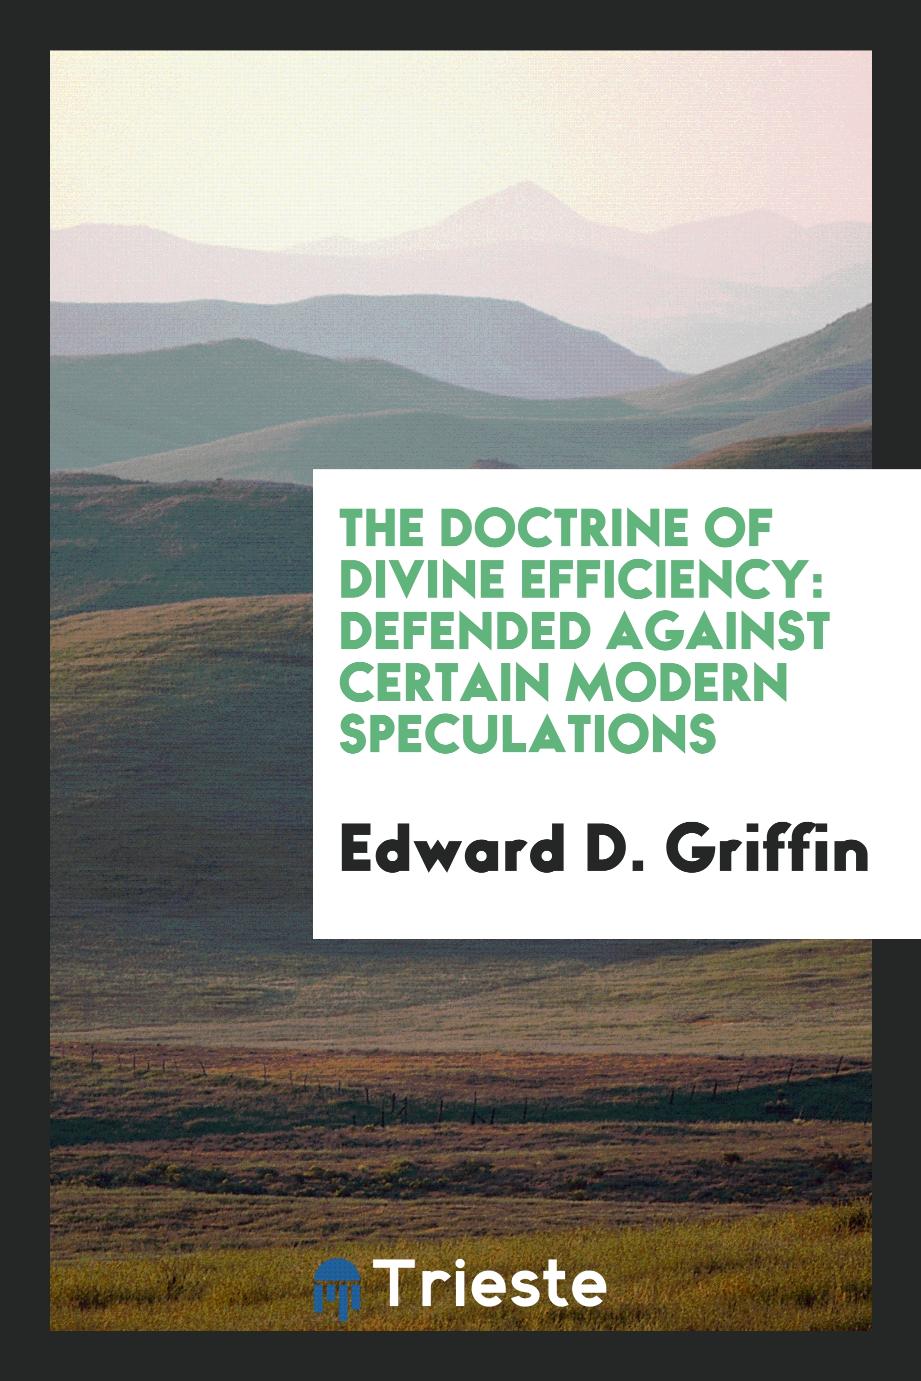 The doctrine of Divine efficiency: defended against certain modern speculations